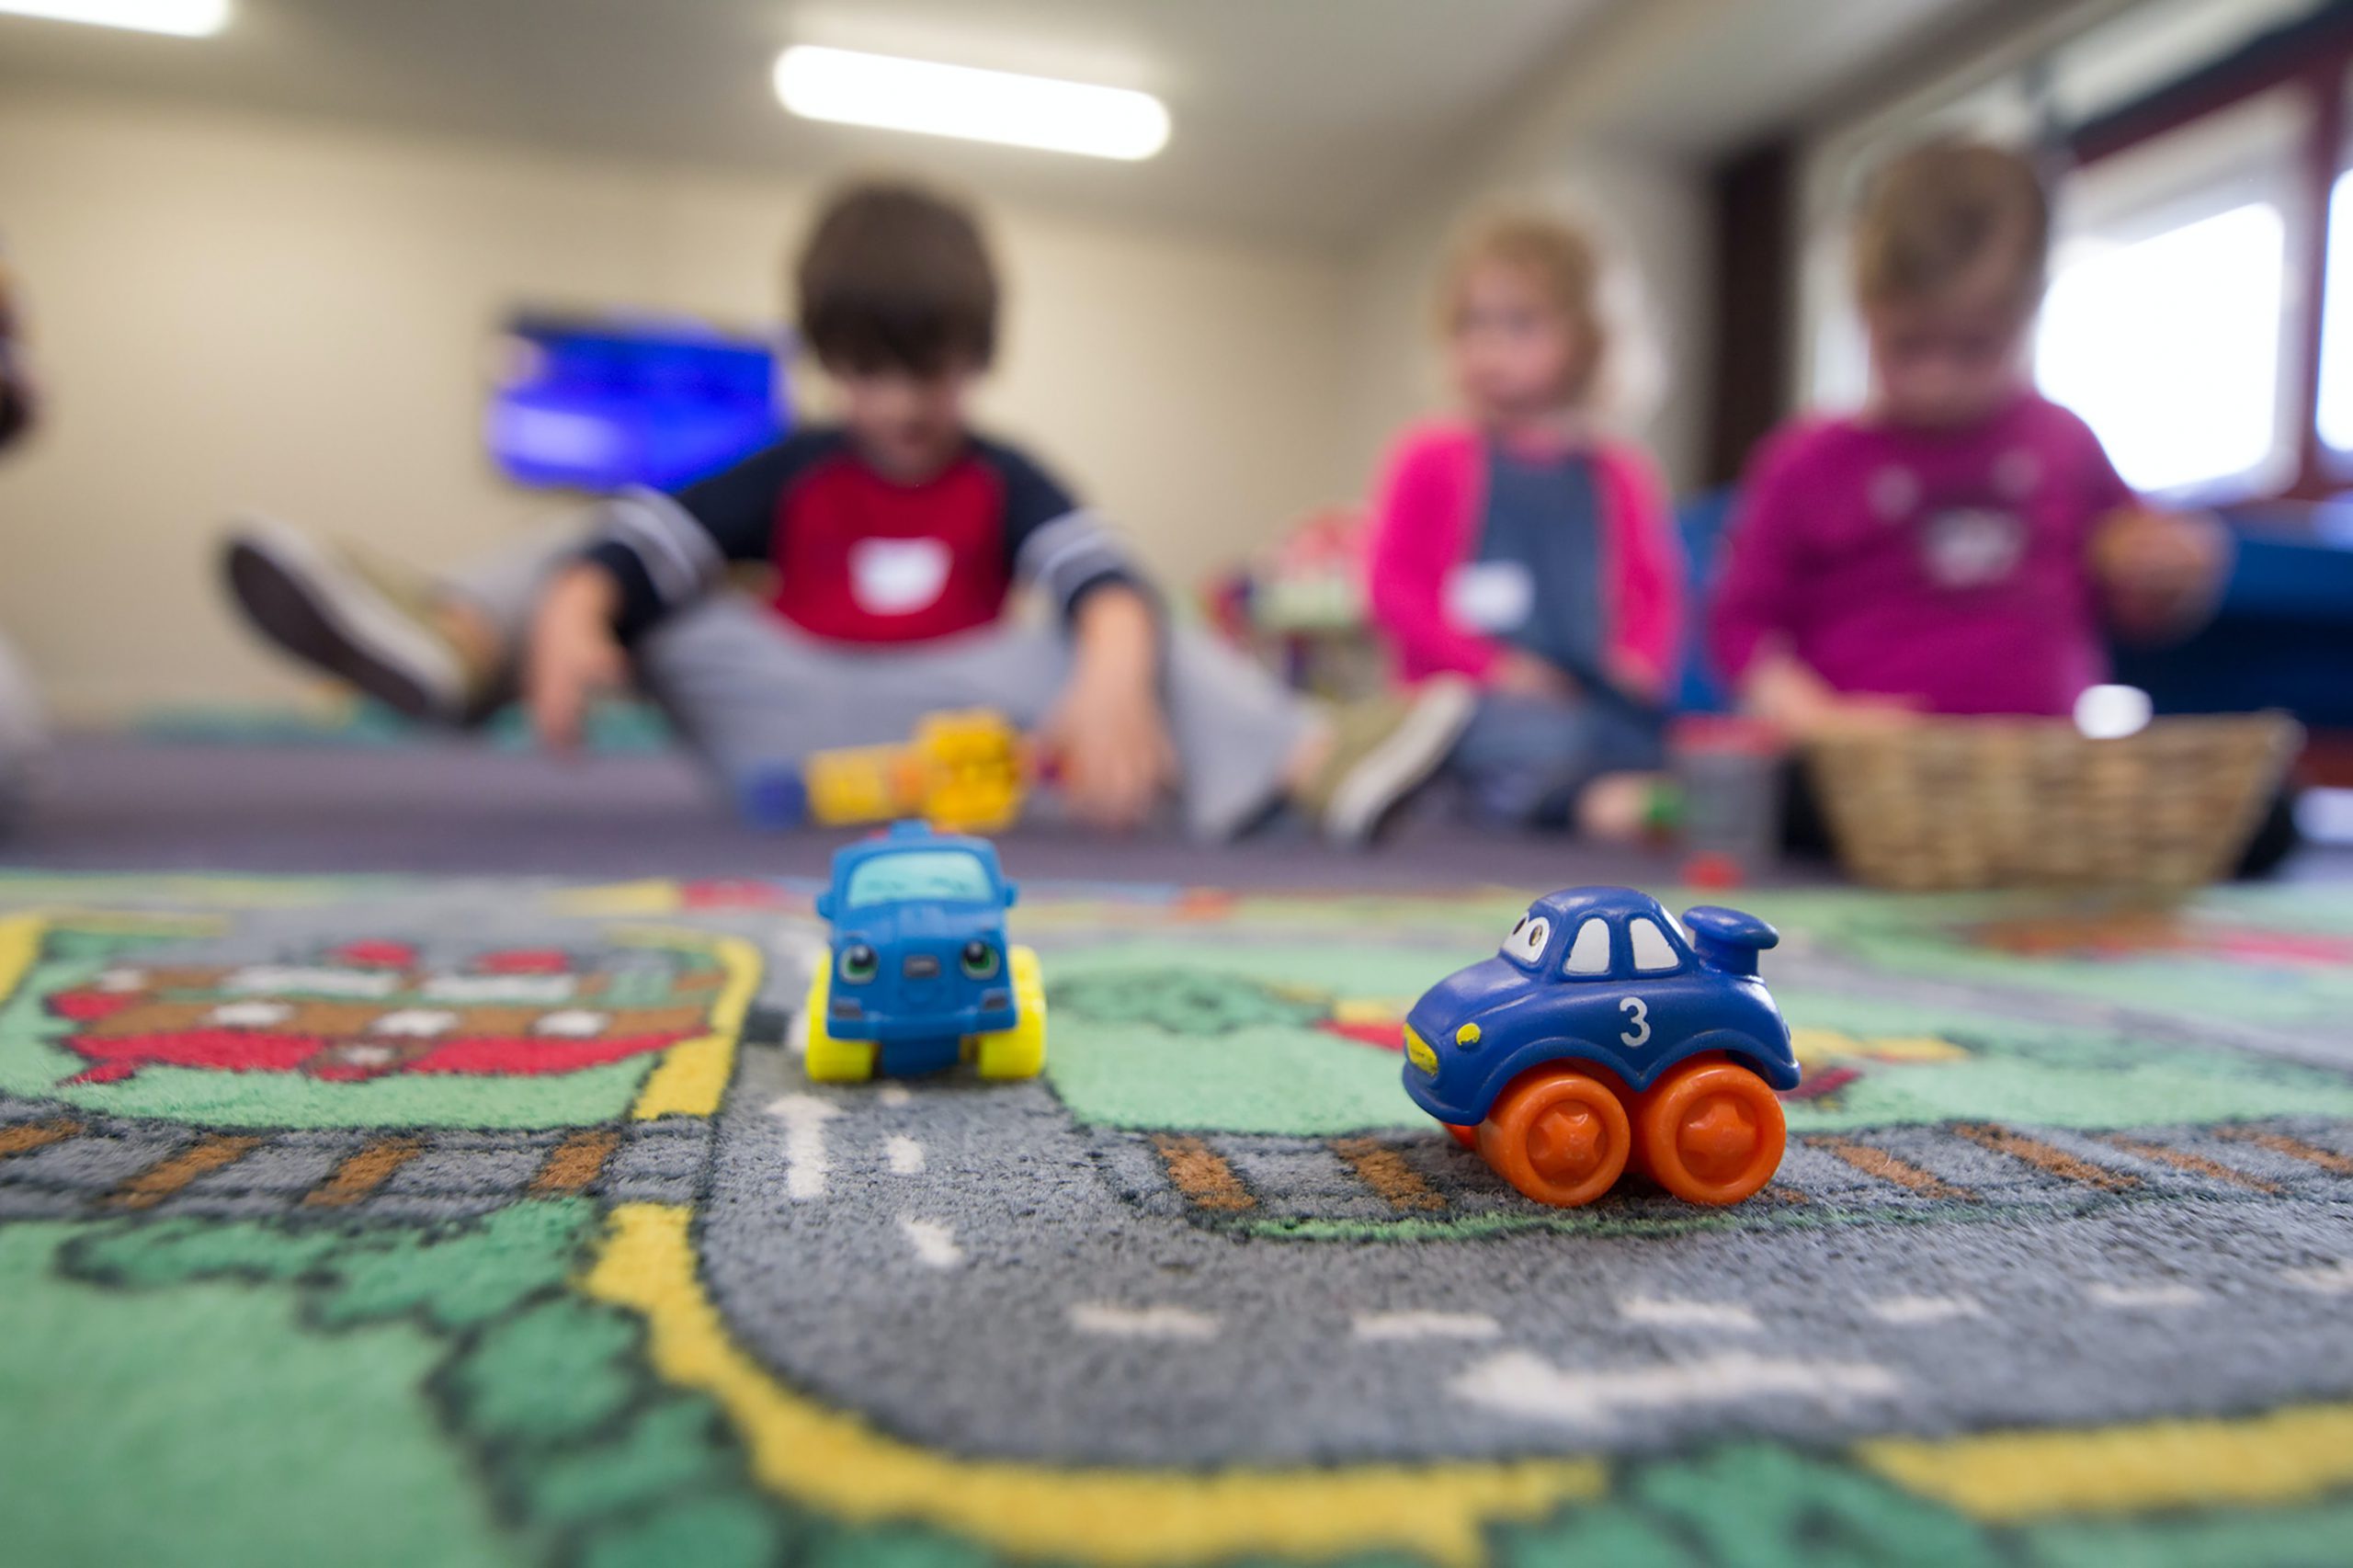 Childs play mat with cars